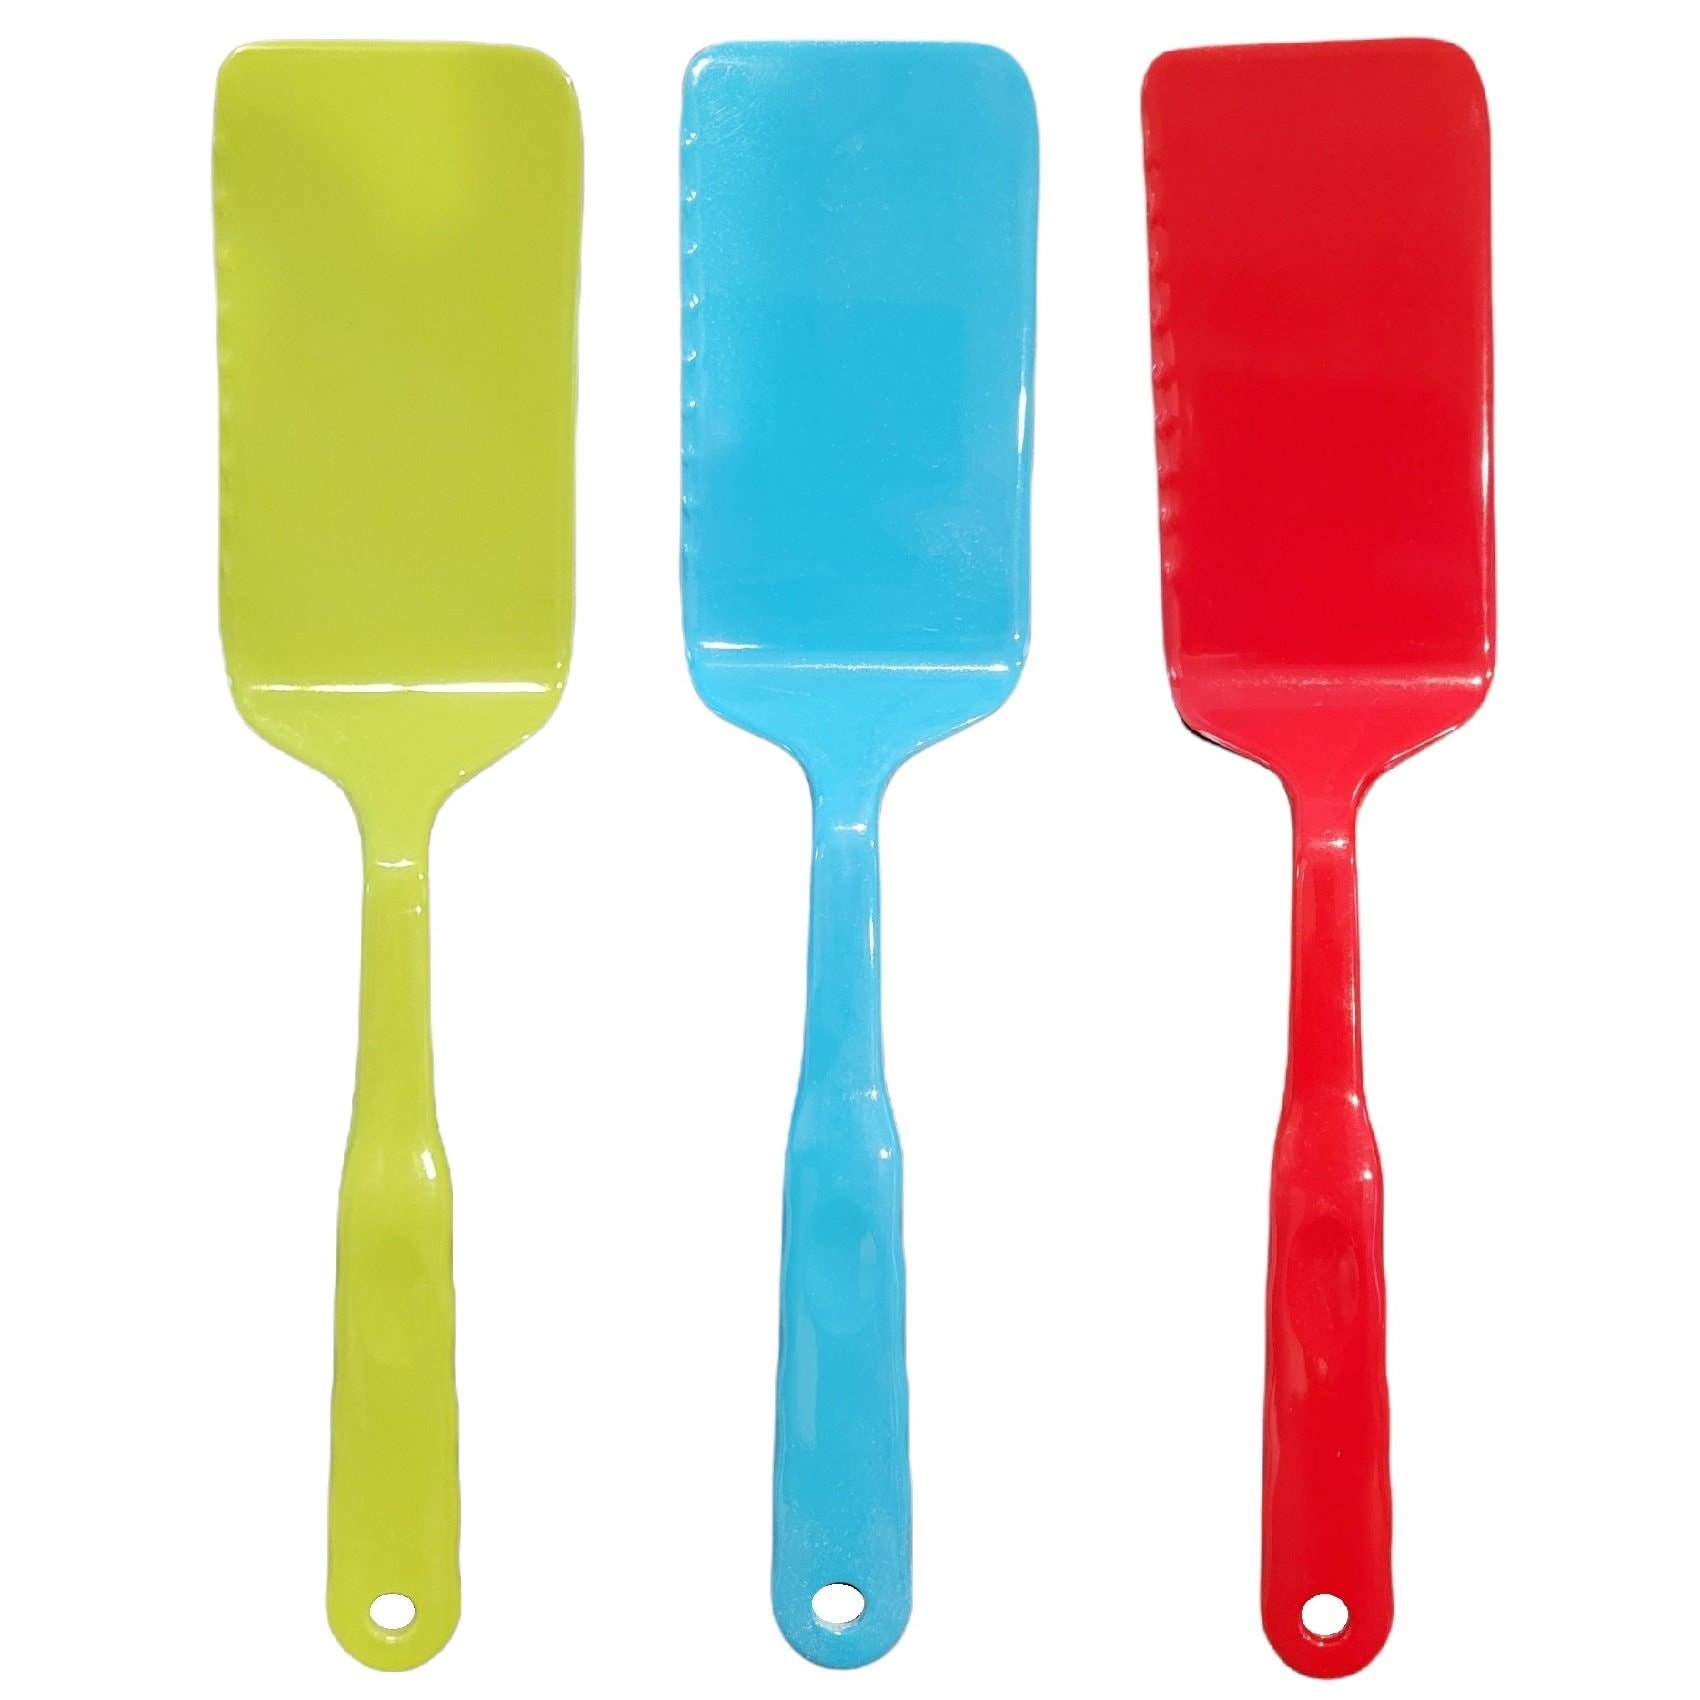 https://ak1.ostkcdn.com/images/products/is/images/direct/2a8b80373510602e00961ae78fa8a8cfcffaf2dd/Handy-Housewares-12.5%22-Long-Handled-Colorful-Melamine-Solid-Cooking-Turner-Spatula.jpg